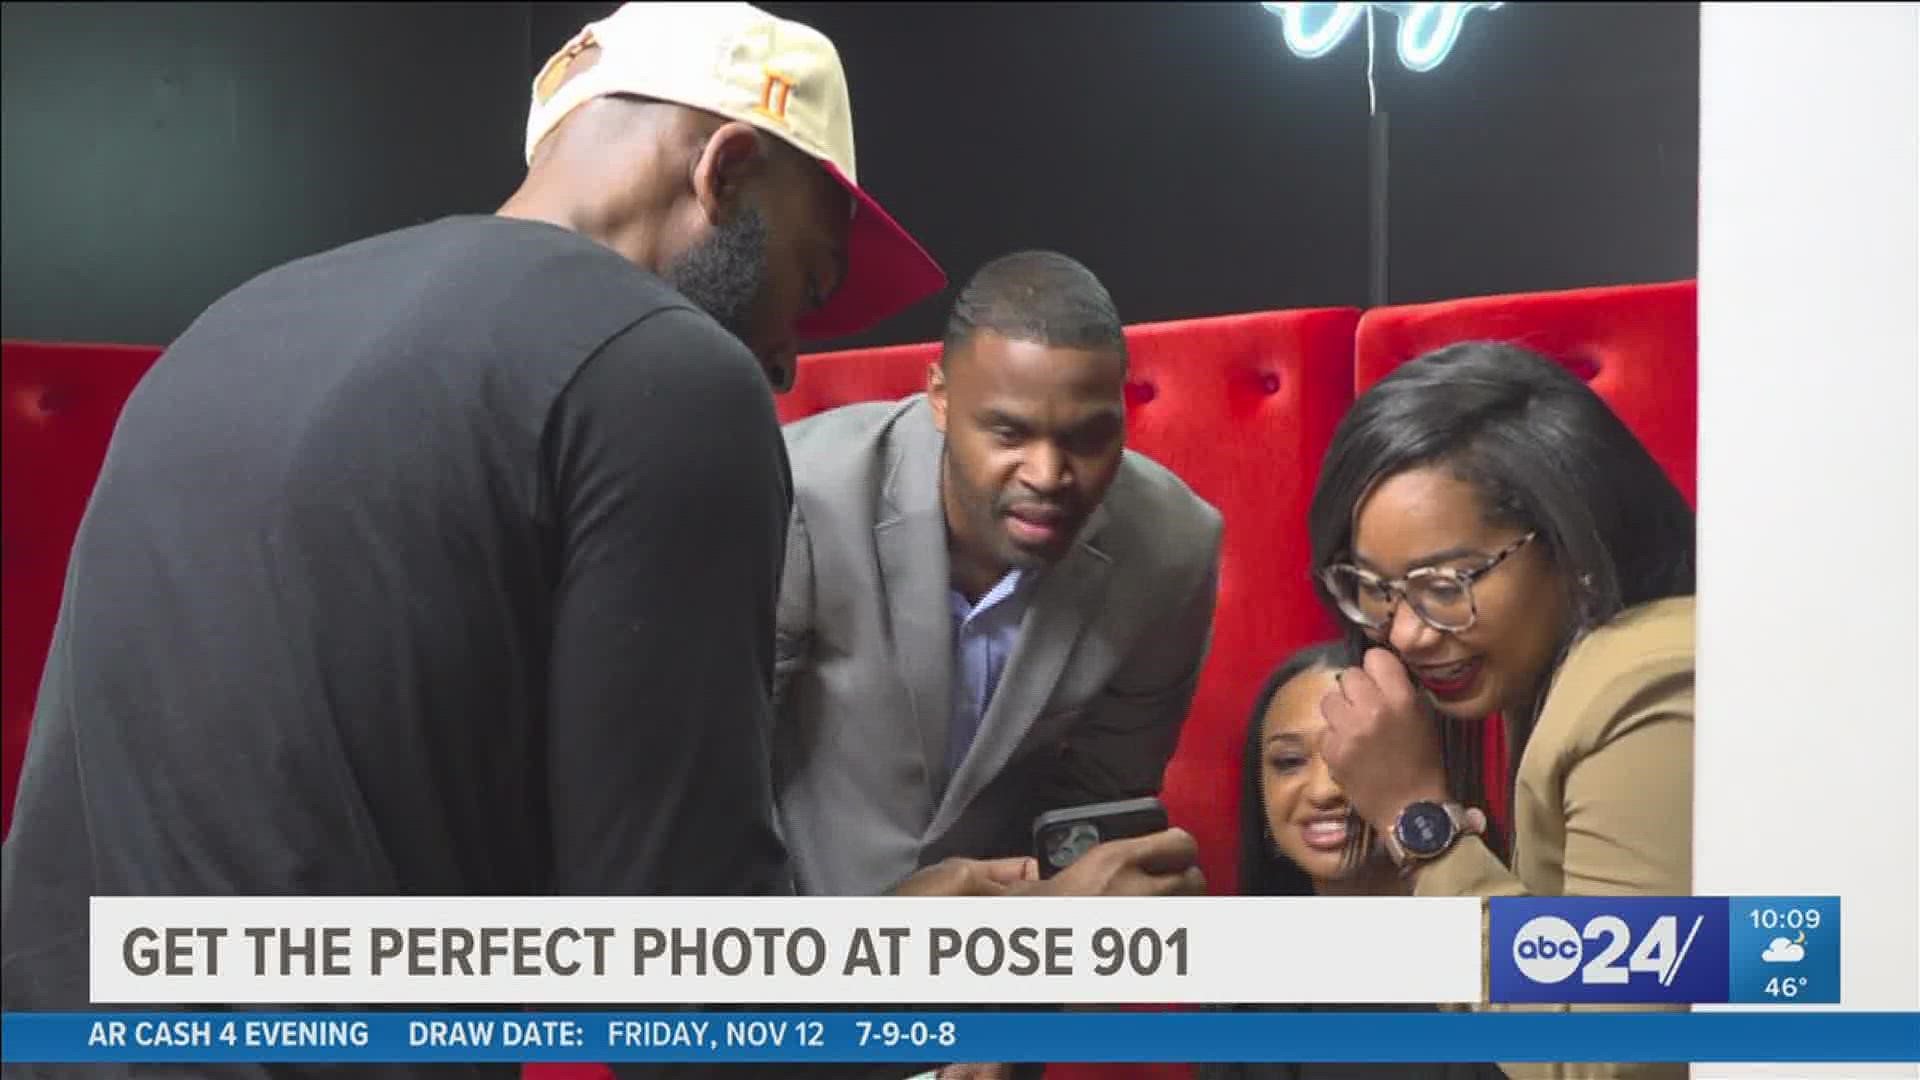 Pose 901 is a selfie studio that is completely Memphis inspired